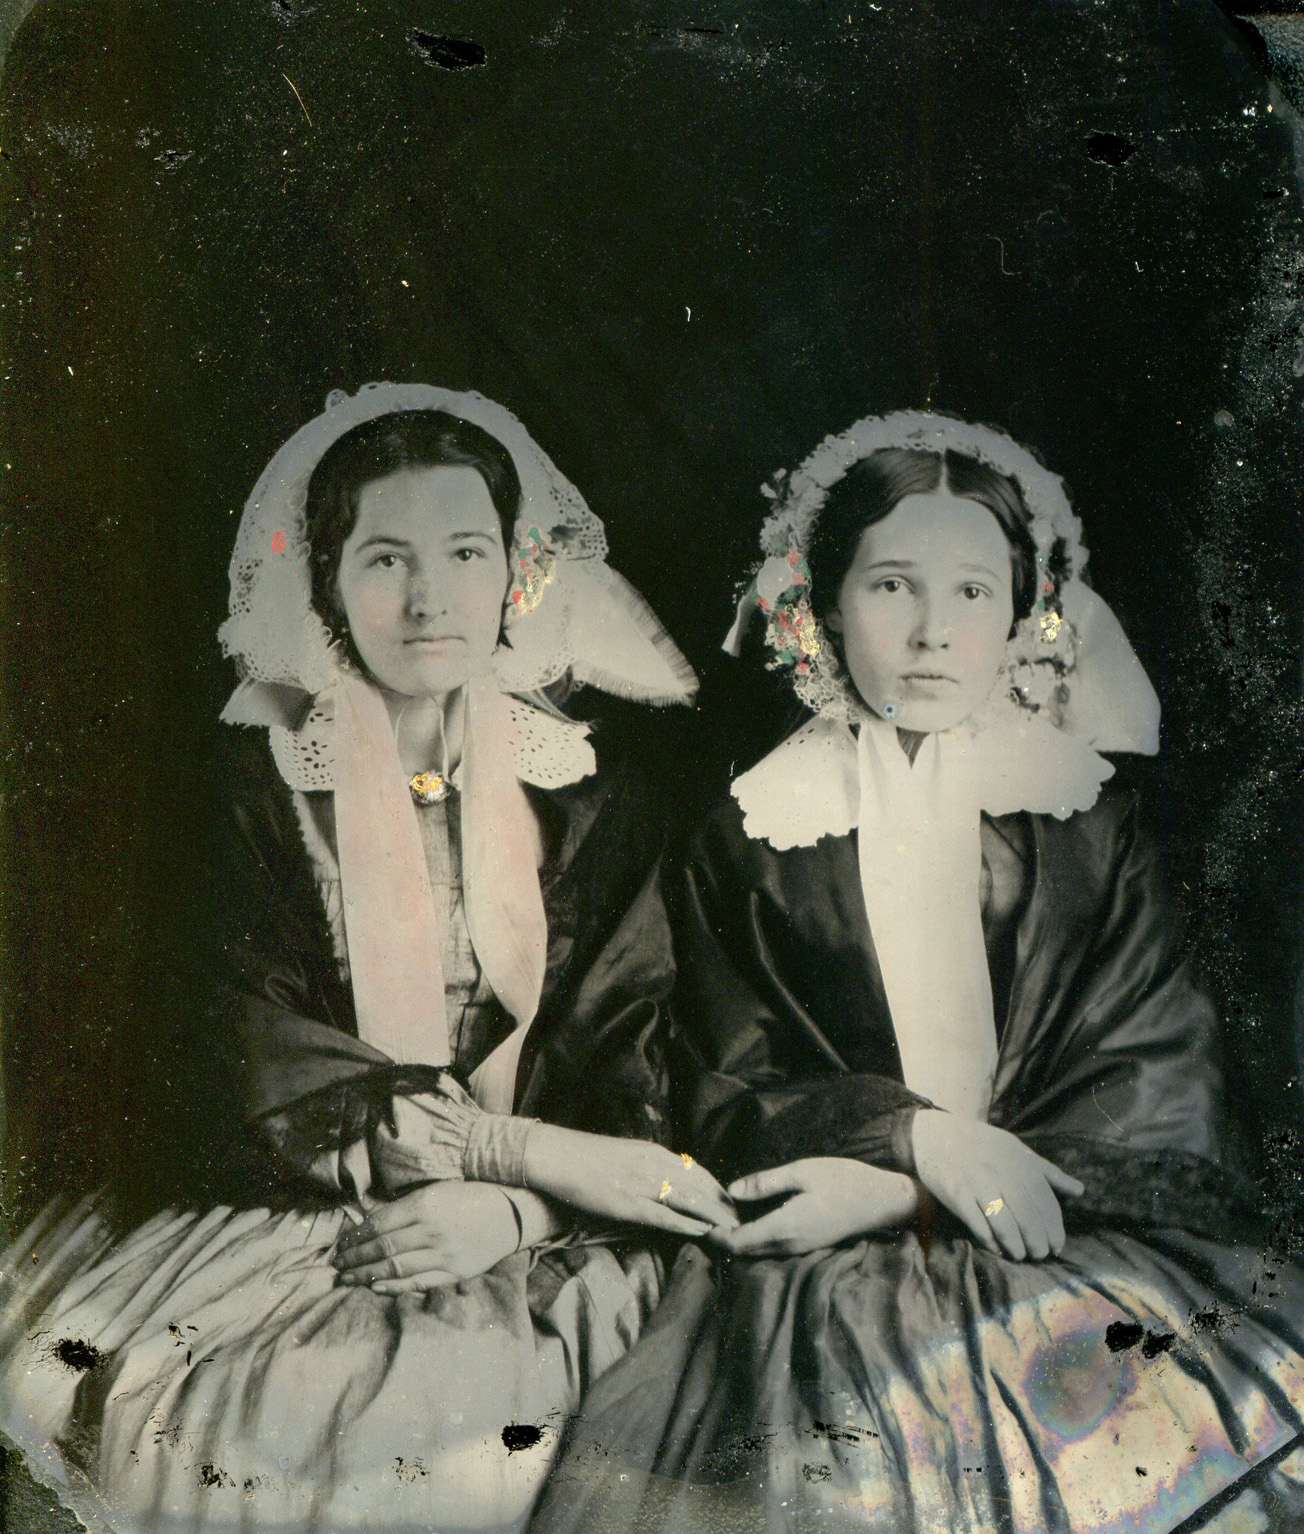 This is a sixth-plate ambrotype (2-3/4" x 3-1/4") on clear glass. Black pigment has been added to non-emulsion side, and color was hand-painted onto emulsion side.  I bought this some years ago an an antique store, and I have no idea who these women are or where this picture was made. View full size.